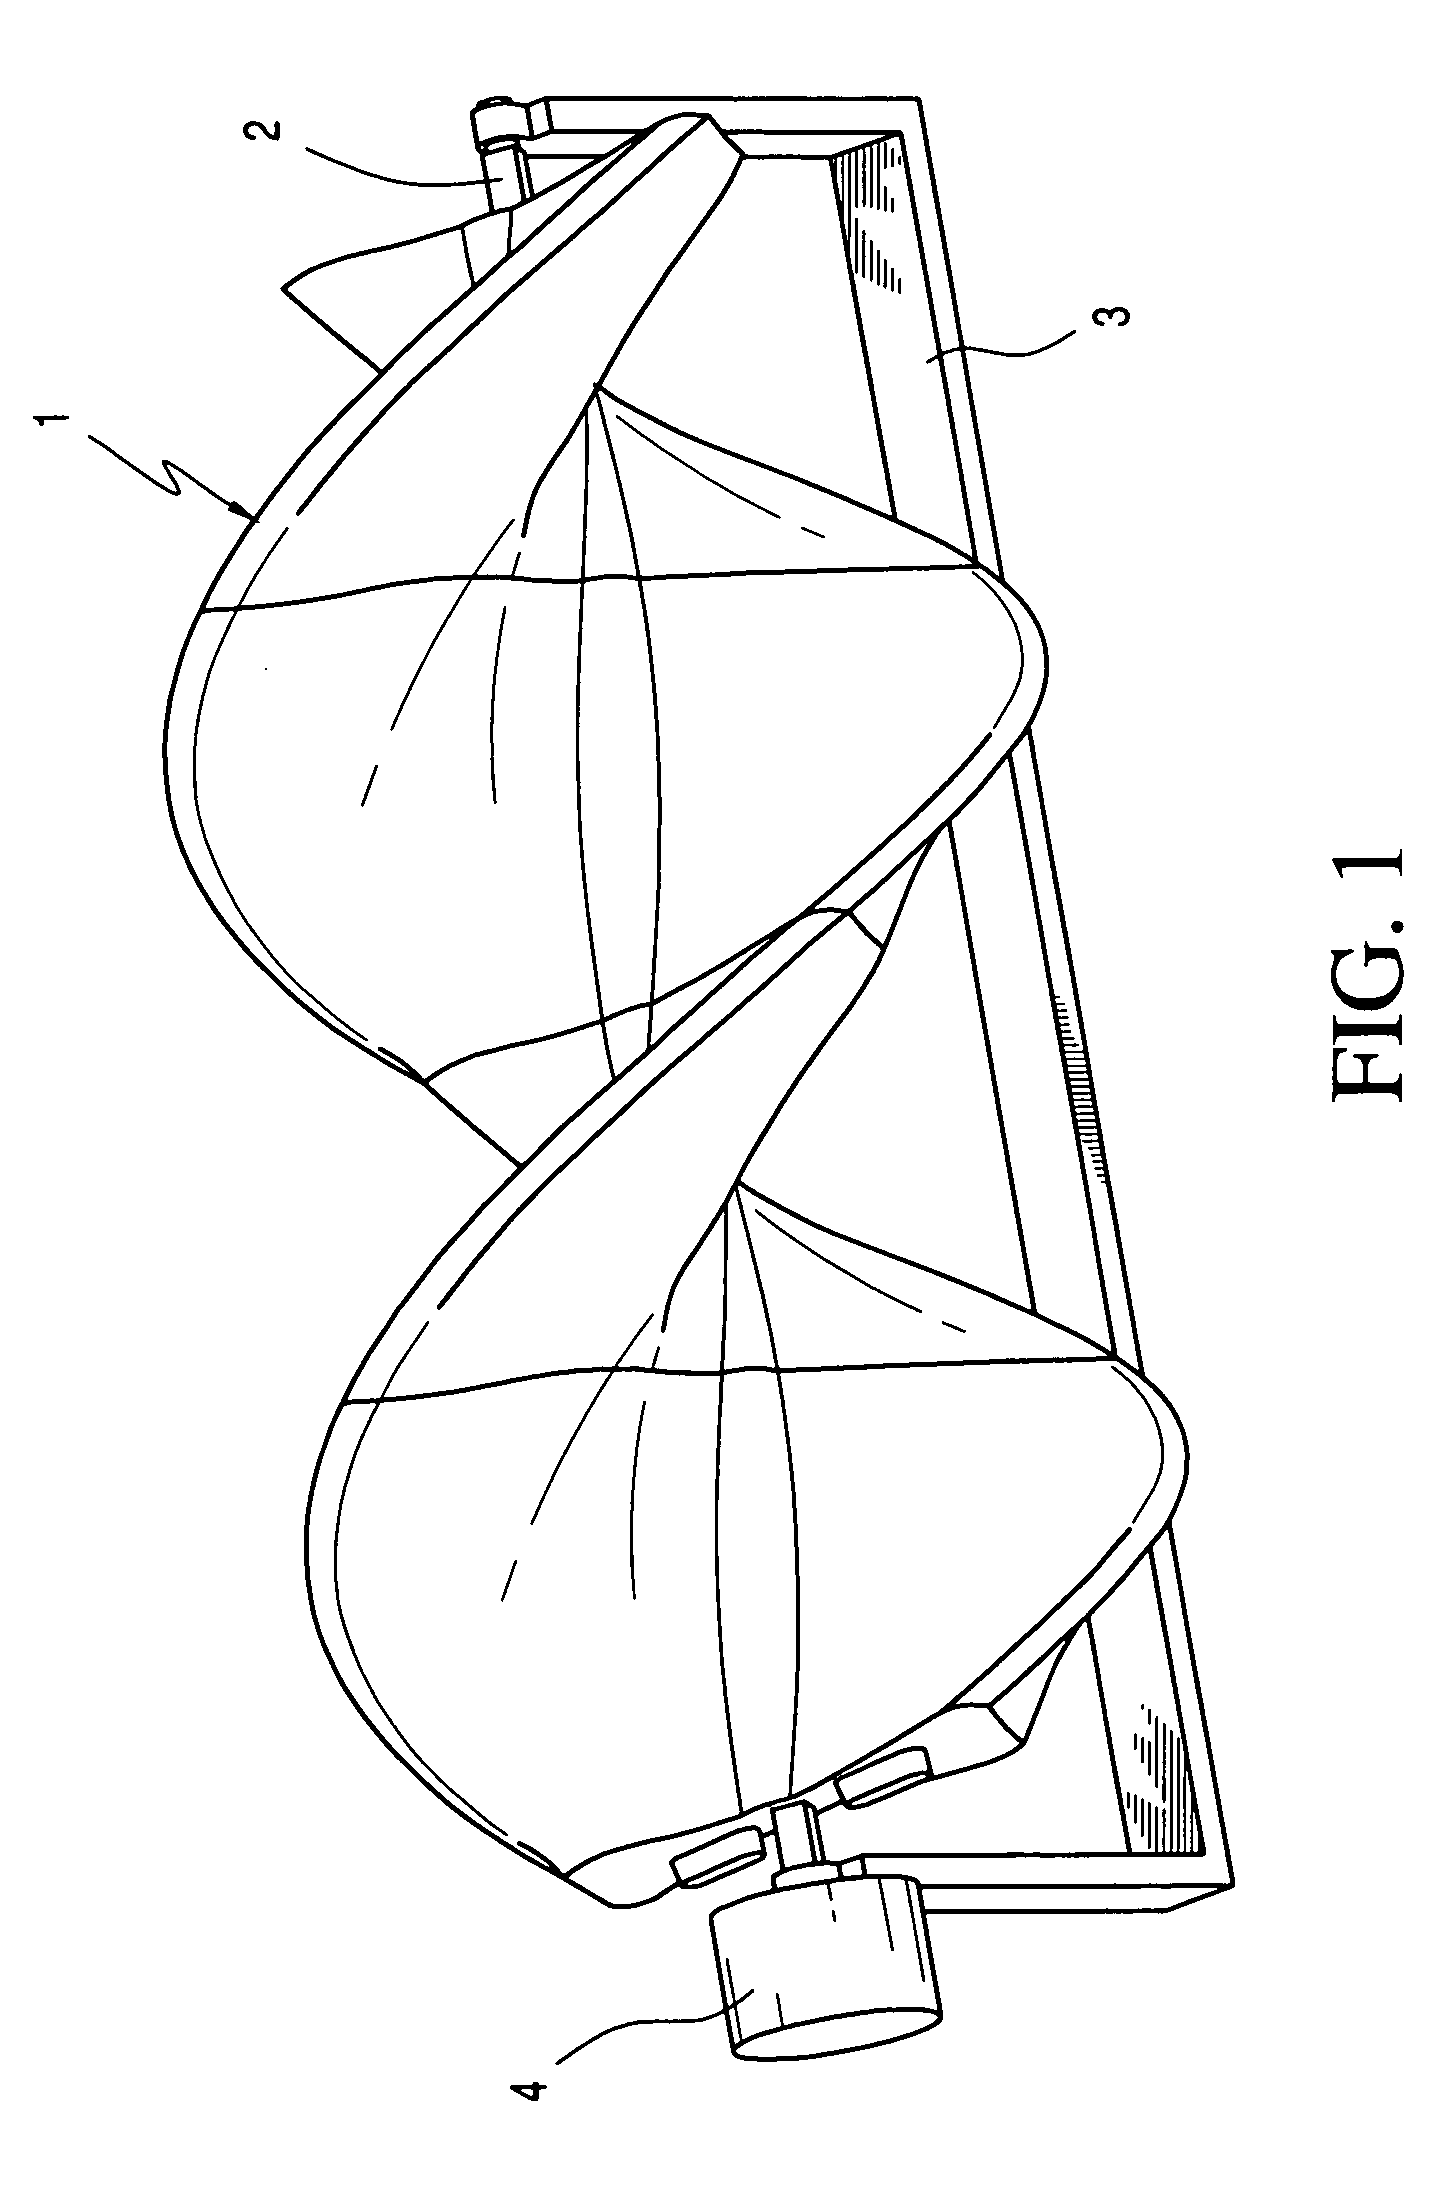 Helical airfoil wind turbines